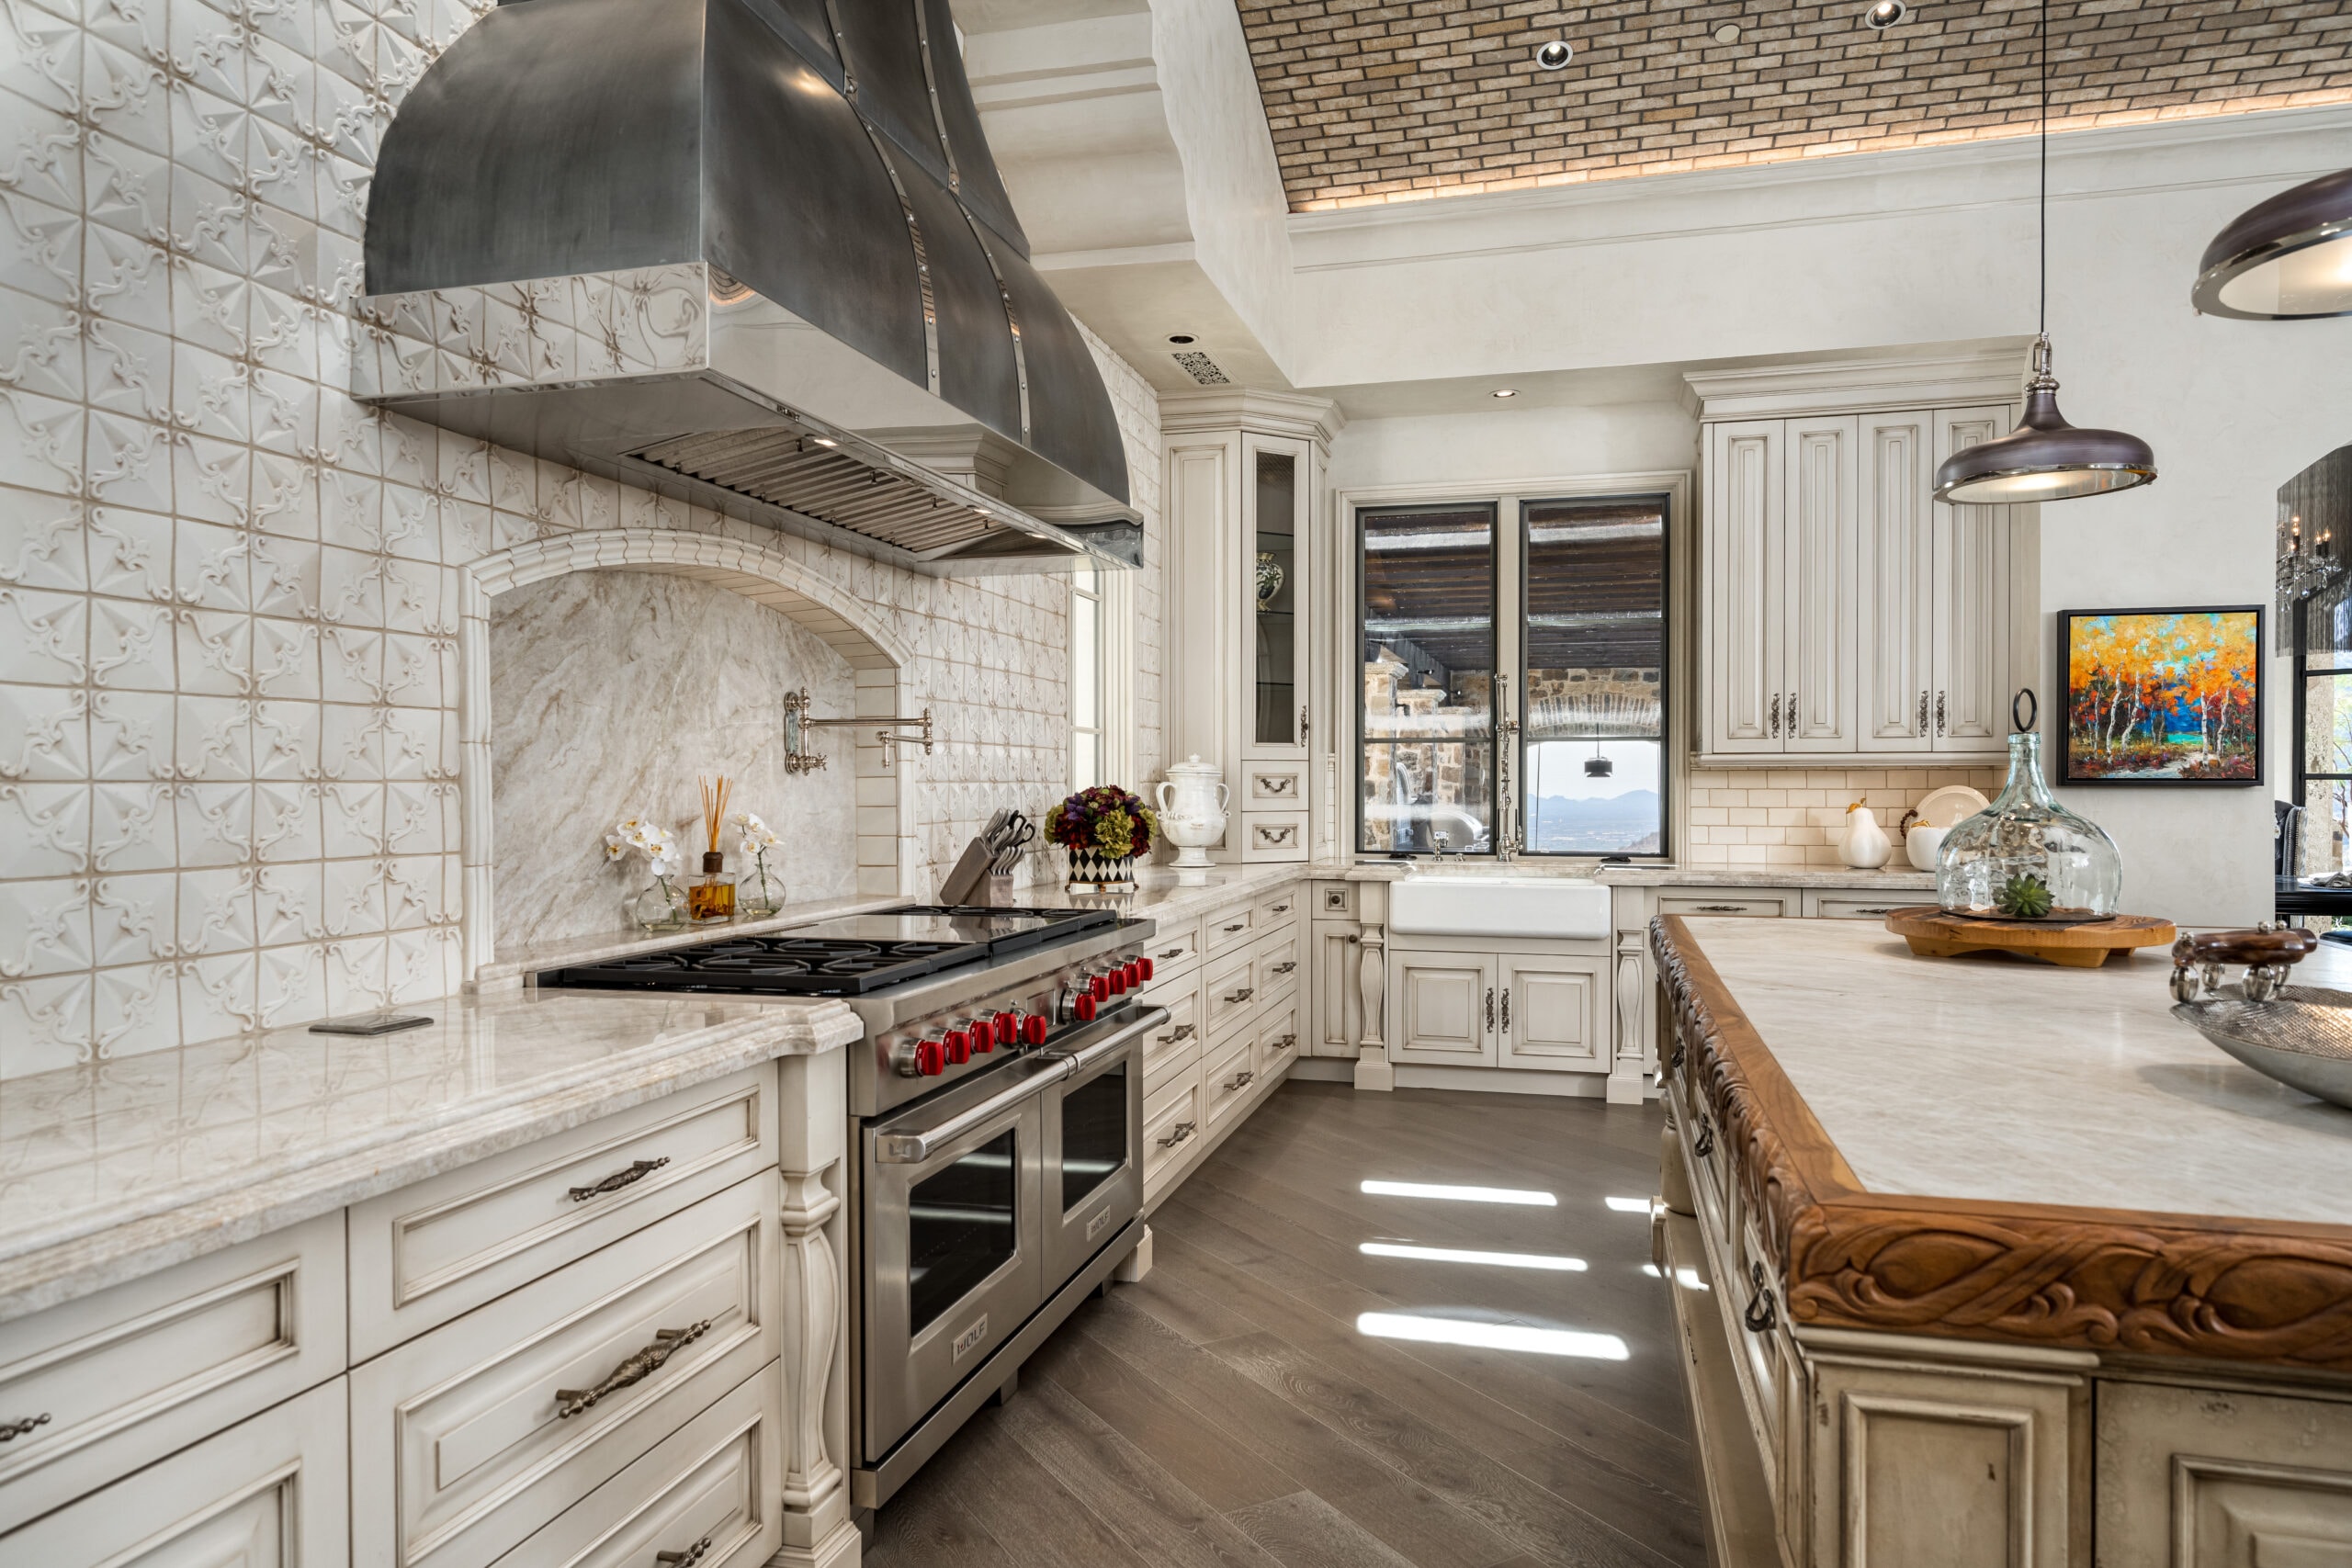 Luxury Kitchen Designs Elegant: Timeless Beauty And Style